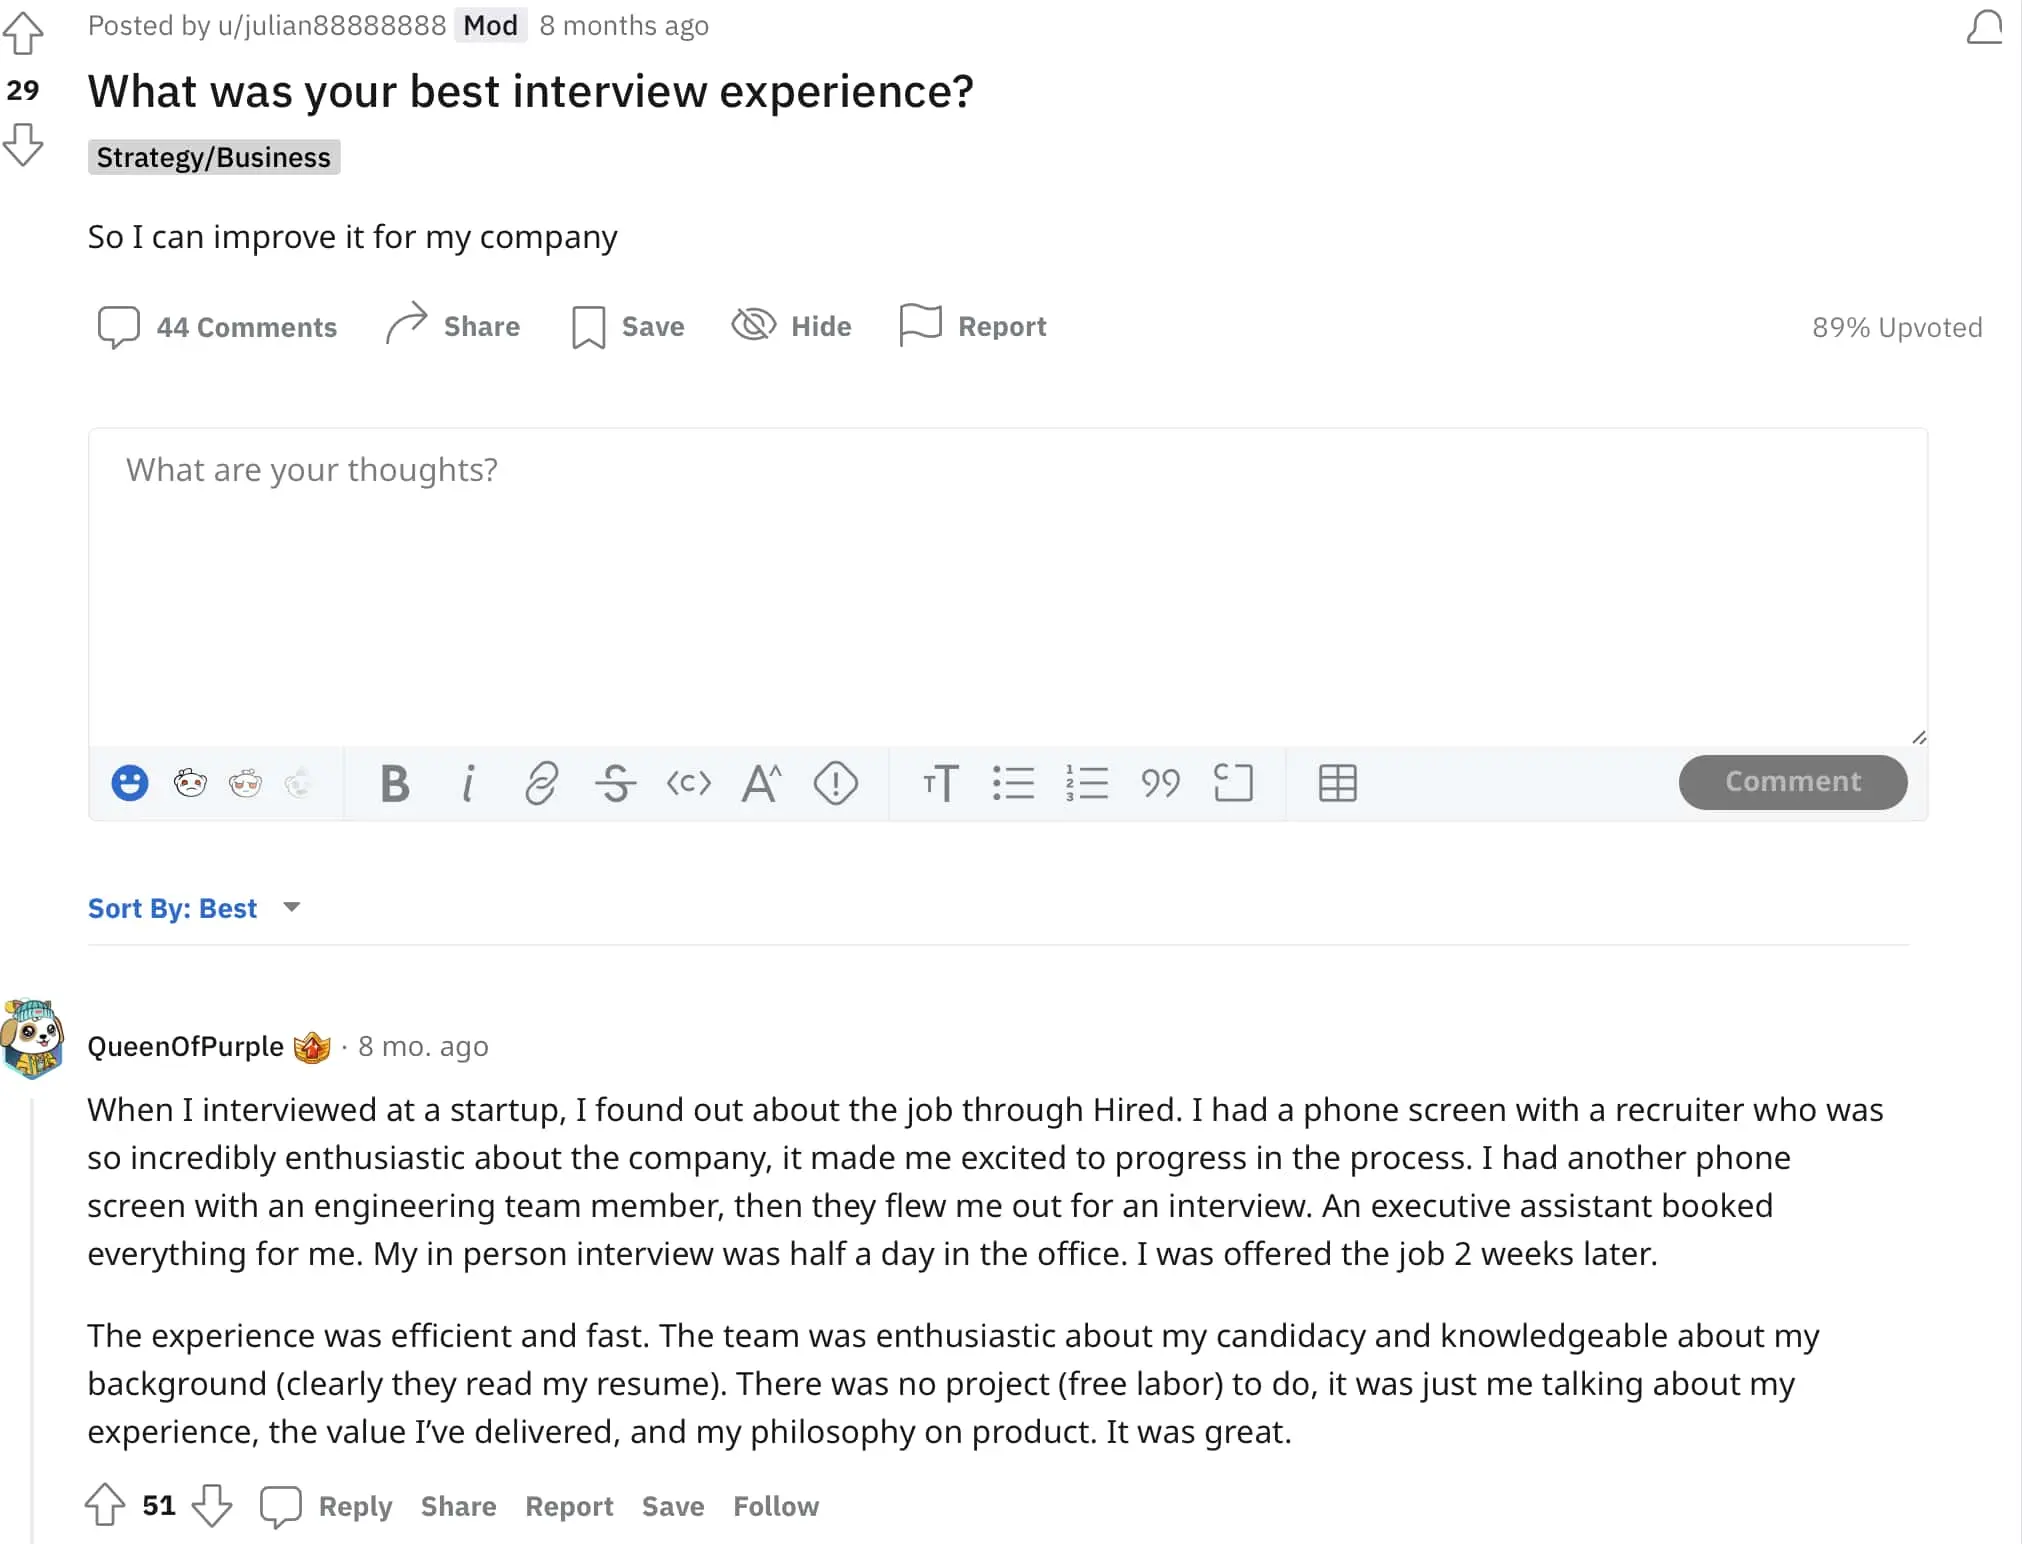 screenshot of redditor showing their best interview experience